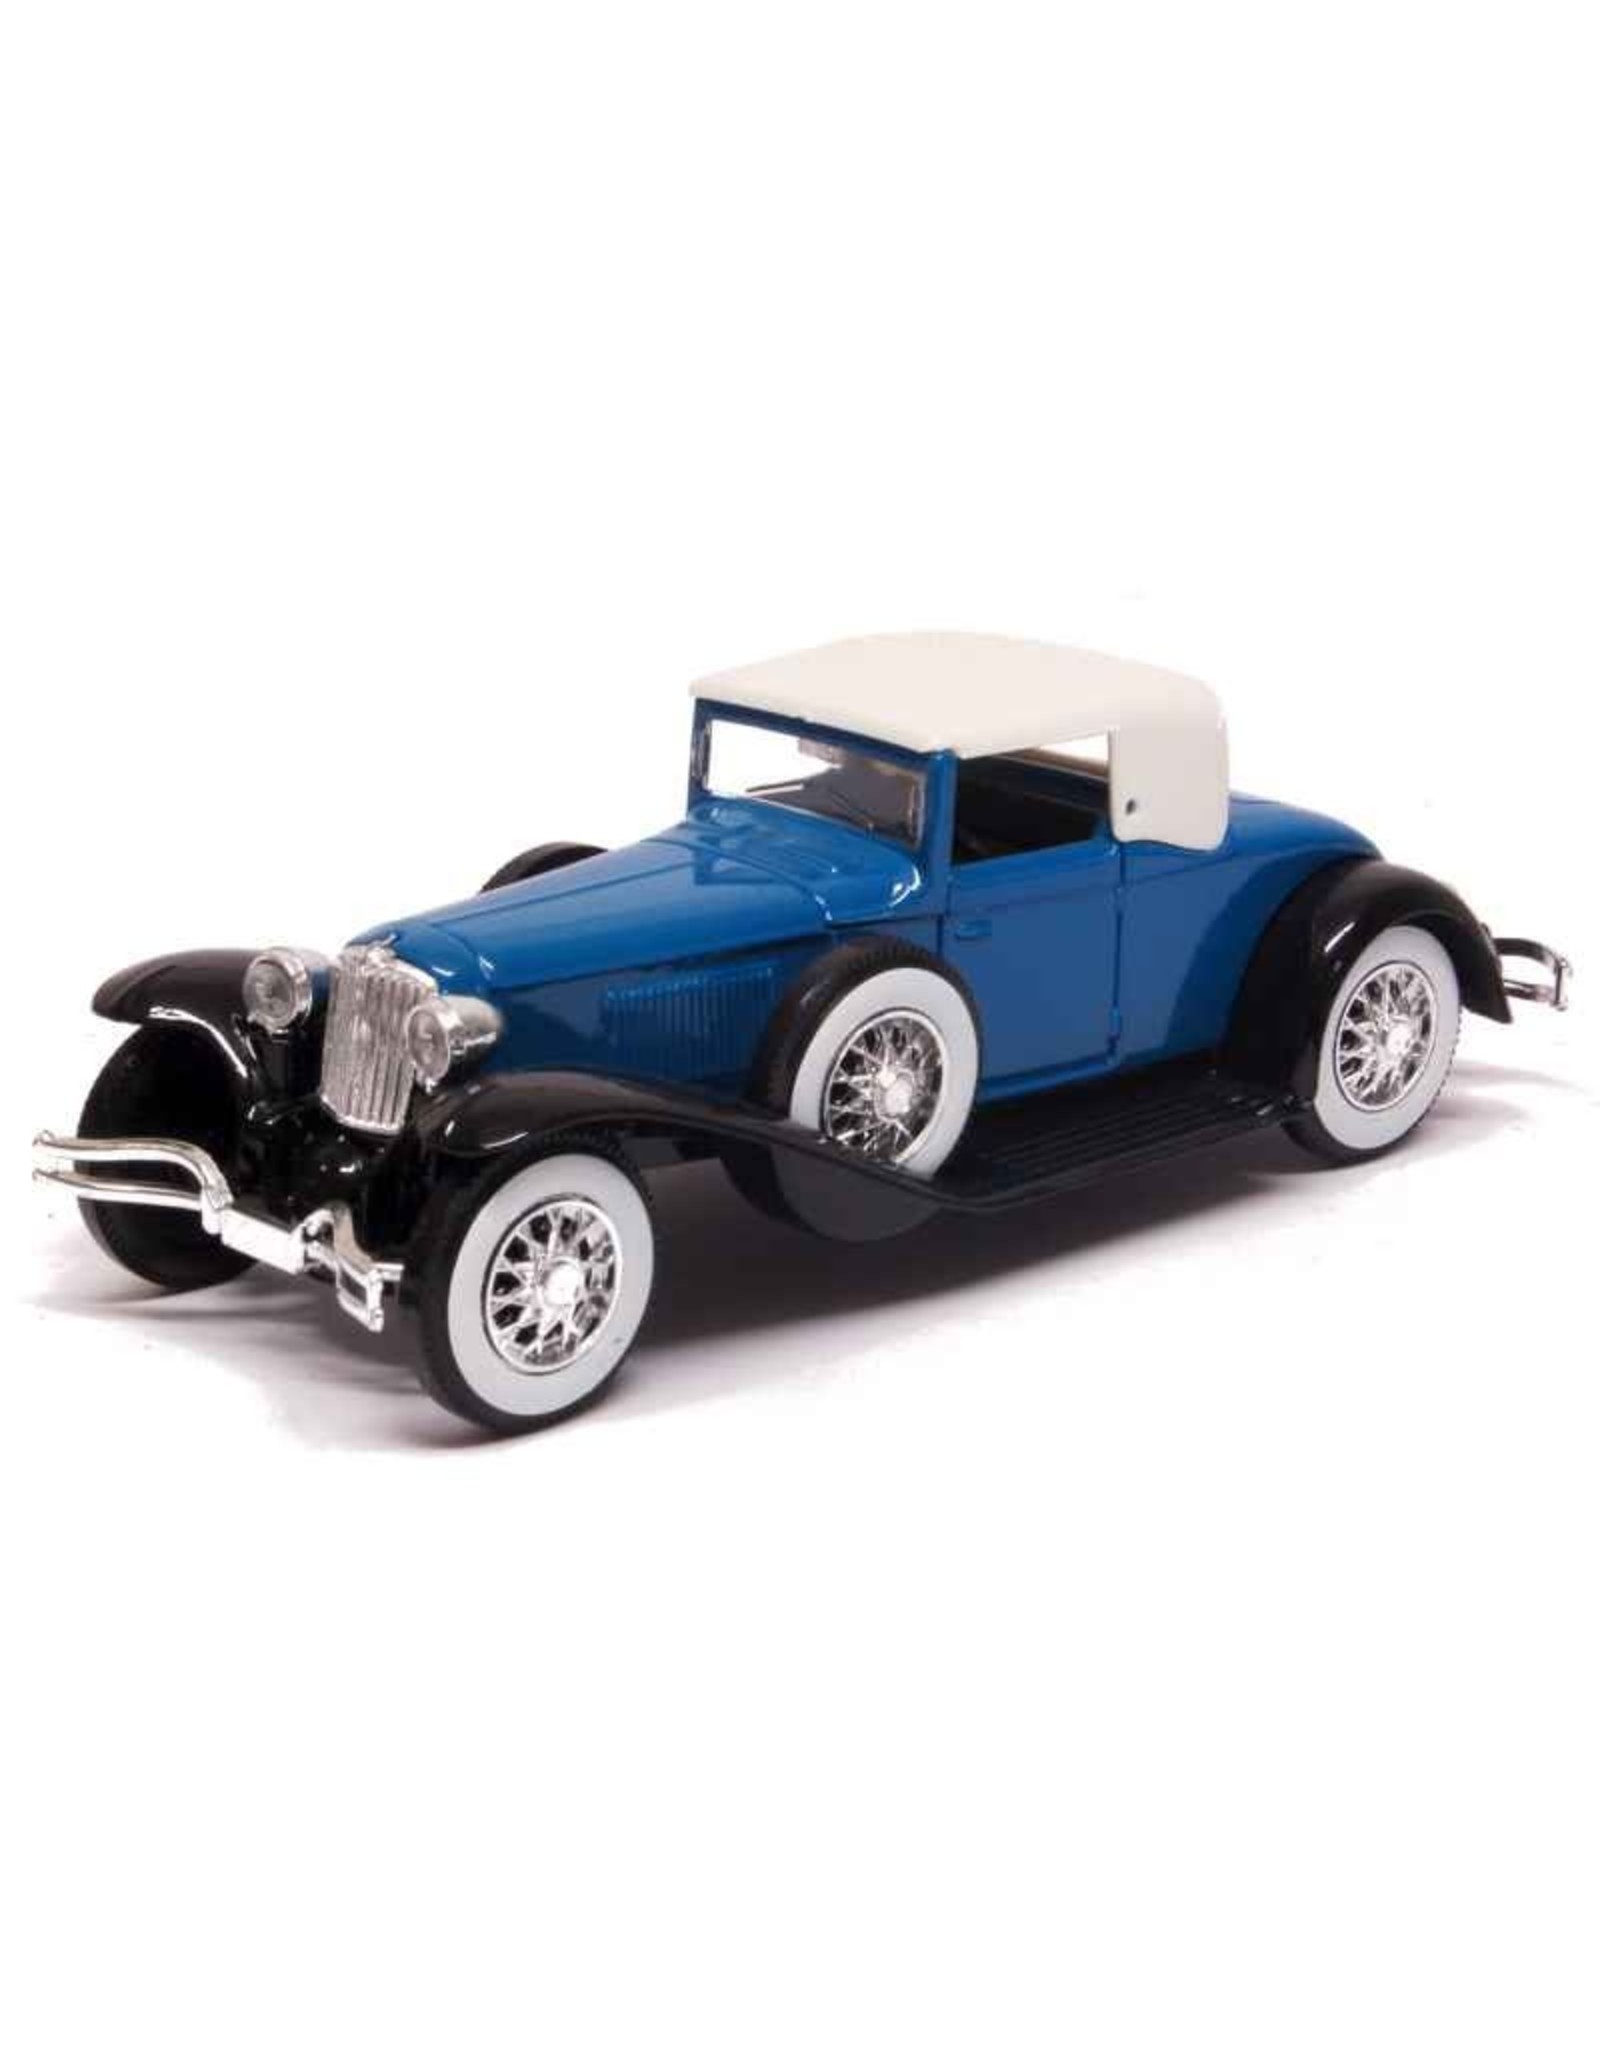 CORD Cord L-29 (1929)blue/white roof